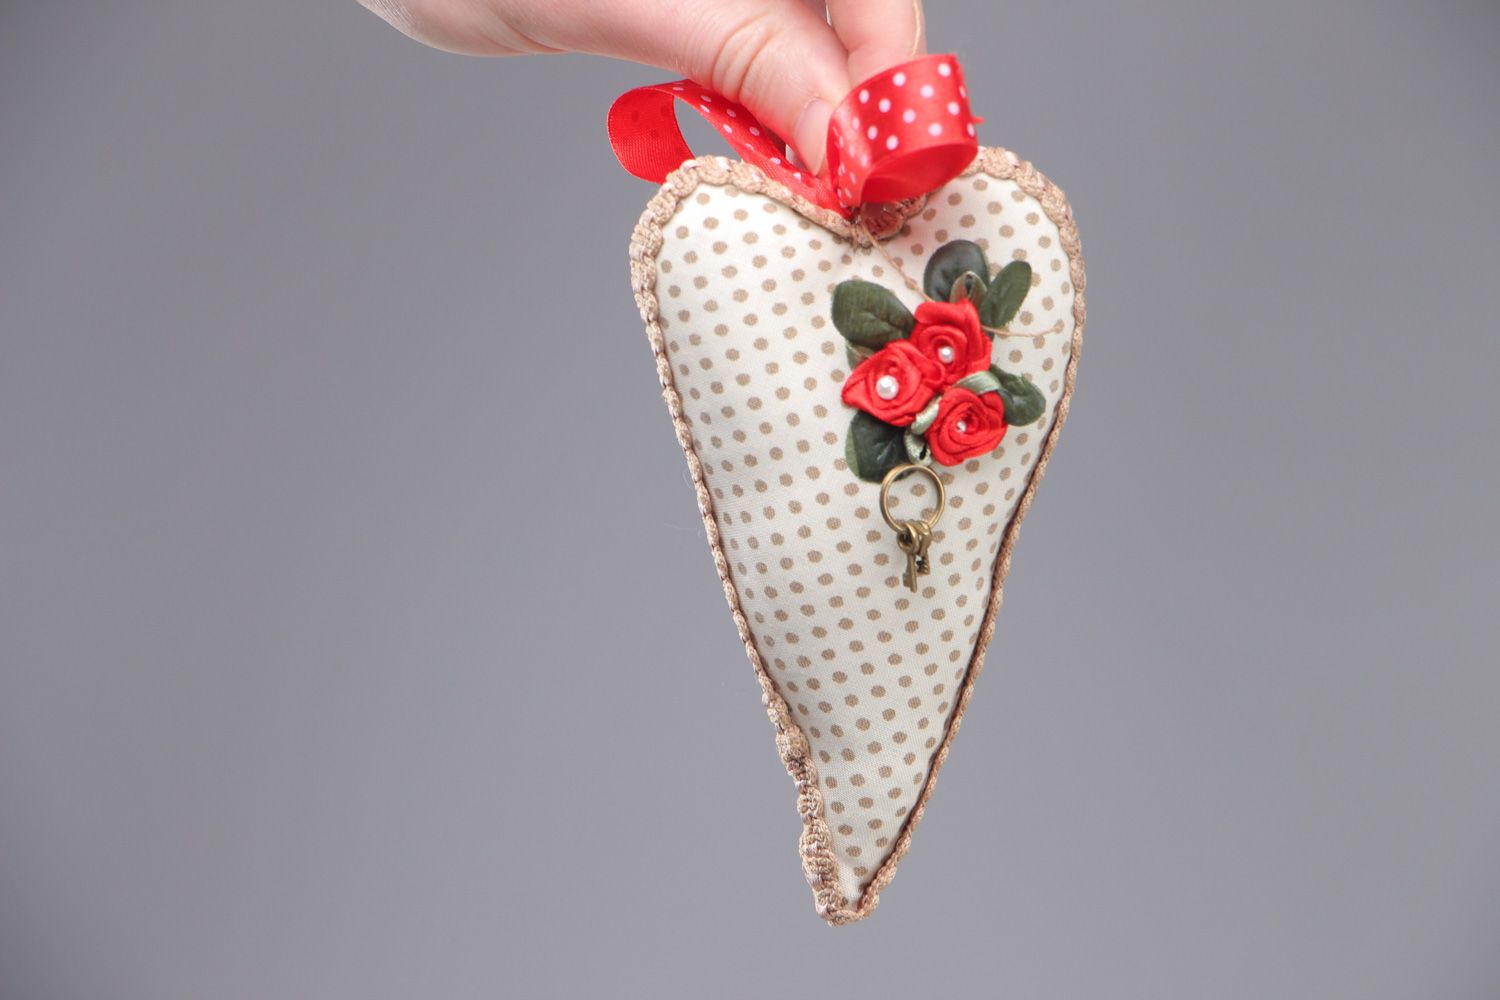 Homemade polka dot fabric interior pendant soft heart with eyelet and flowers photo 4